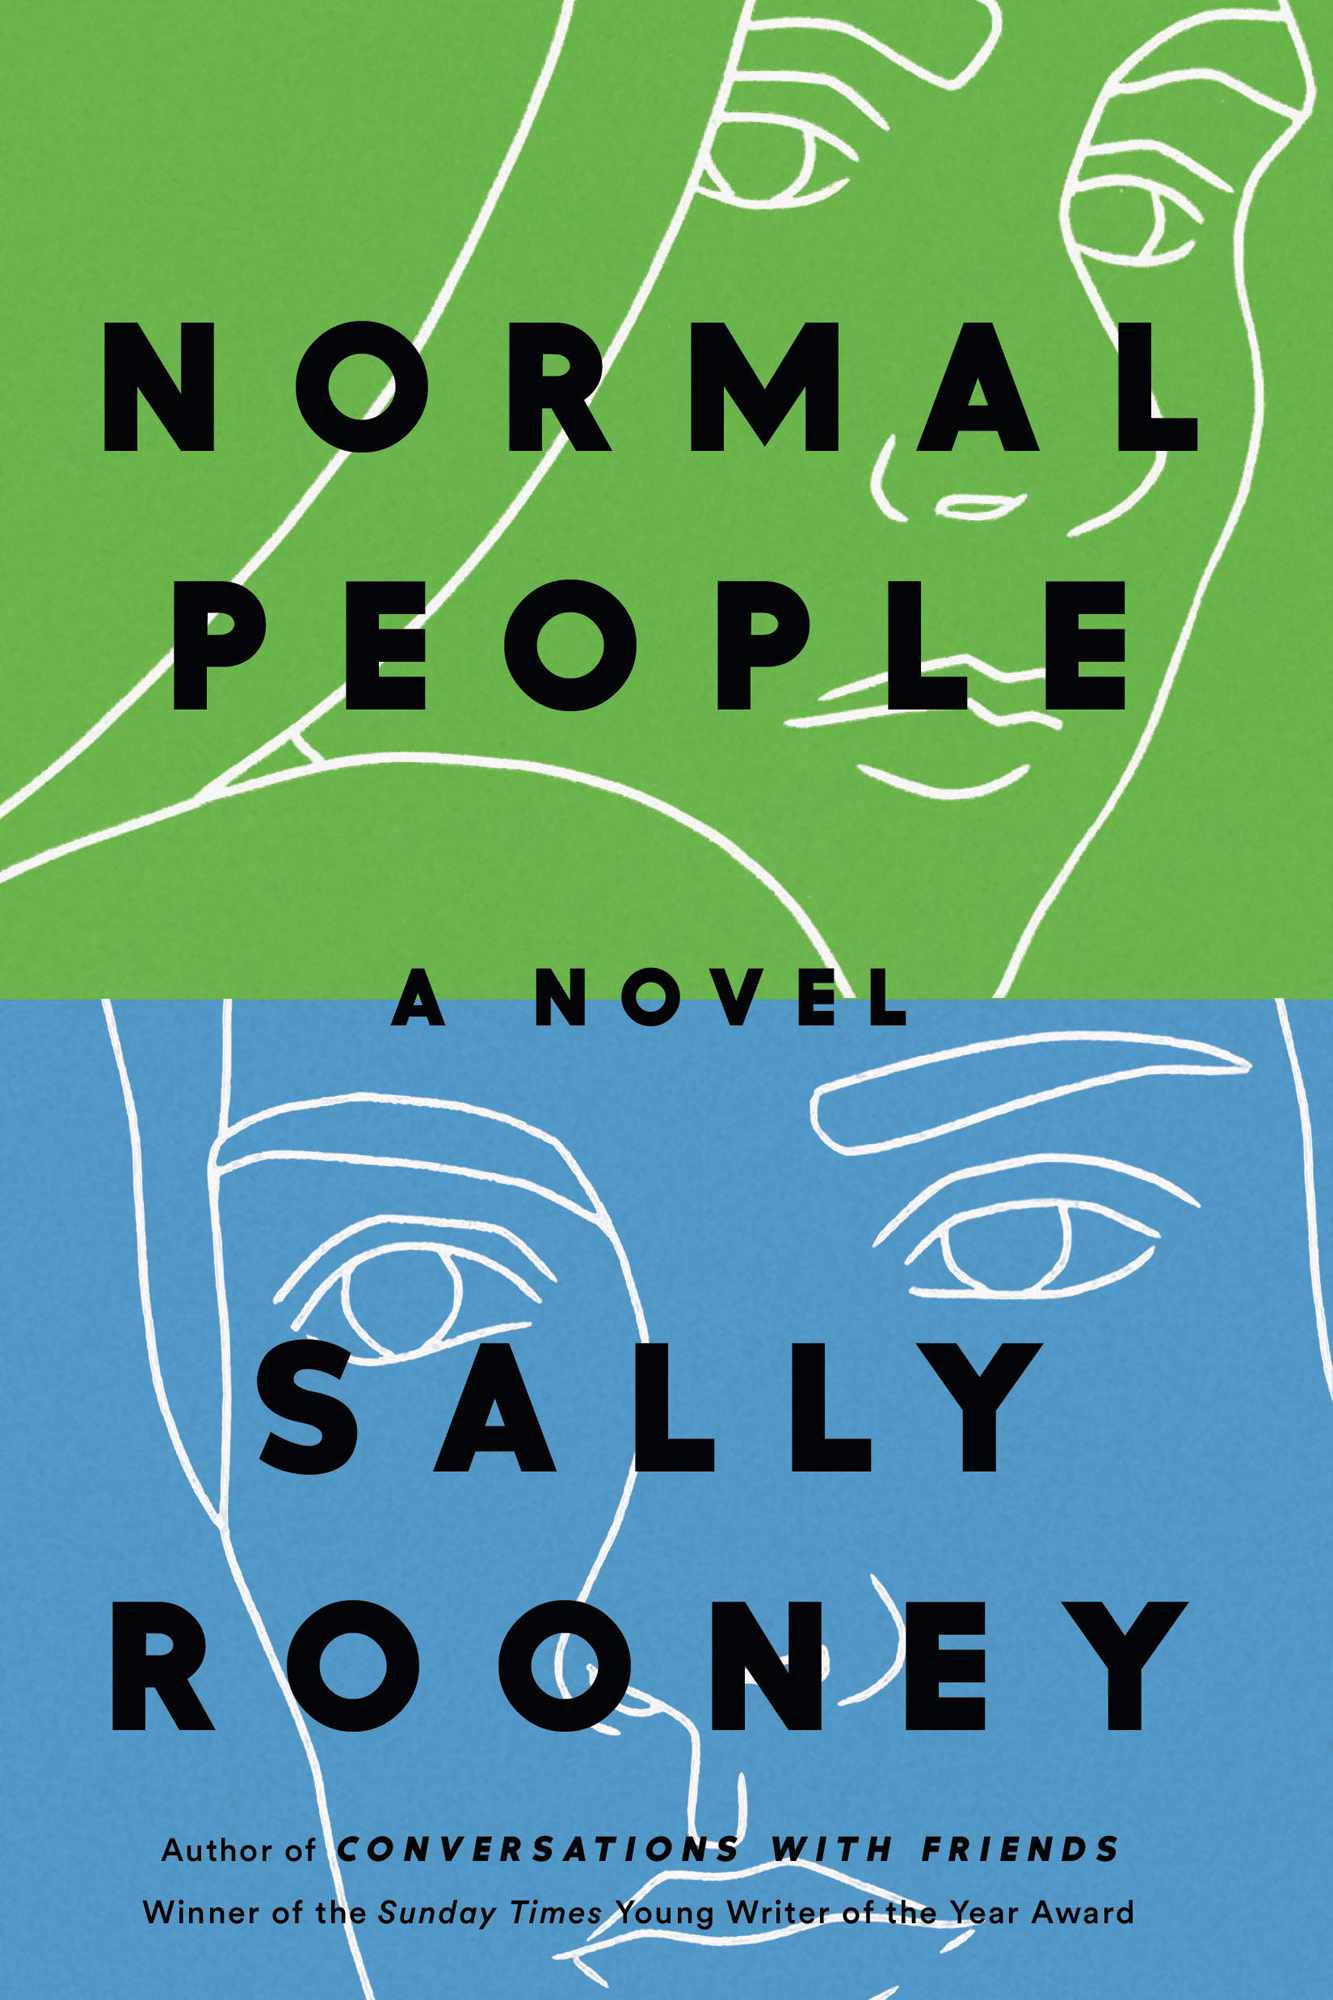 Normal People, by Sally Rooney